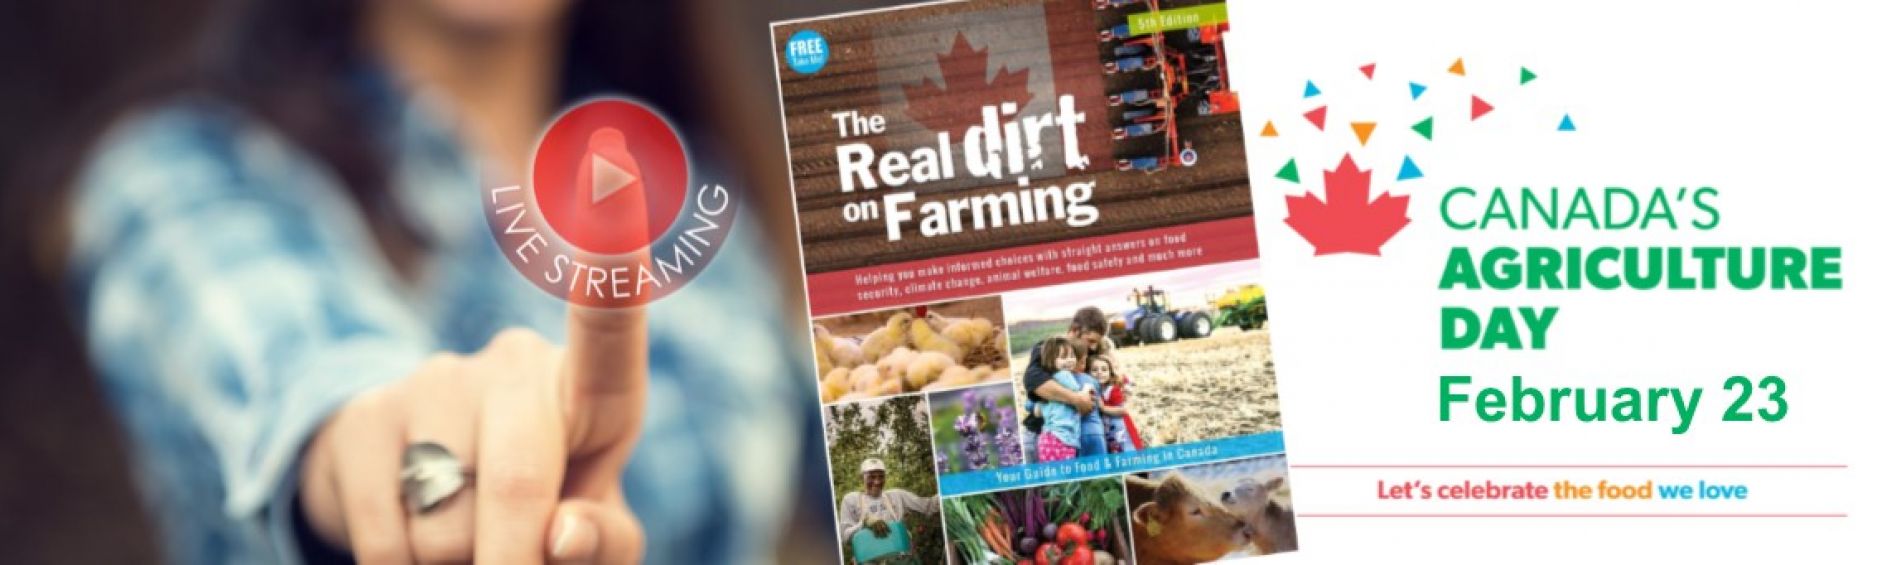 Live Farm Tours and The Real Dirt on Farming Launch for Canada's Ag Day